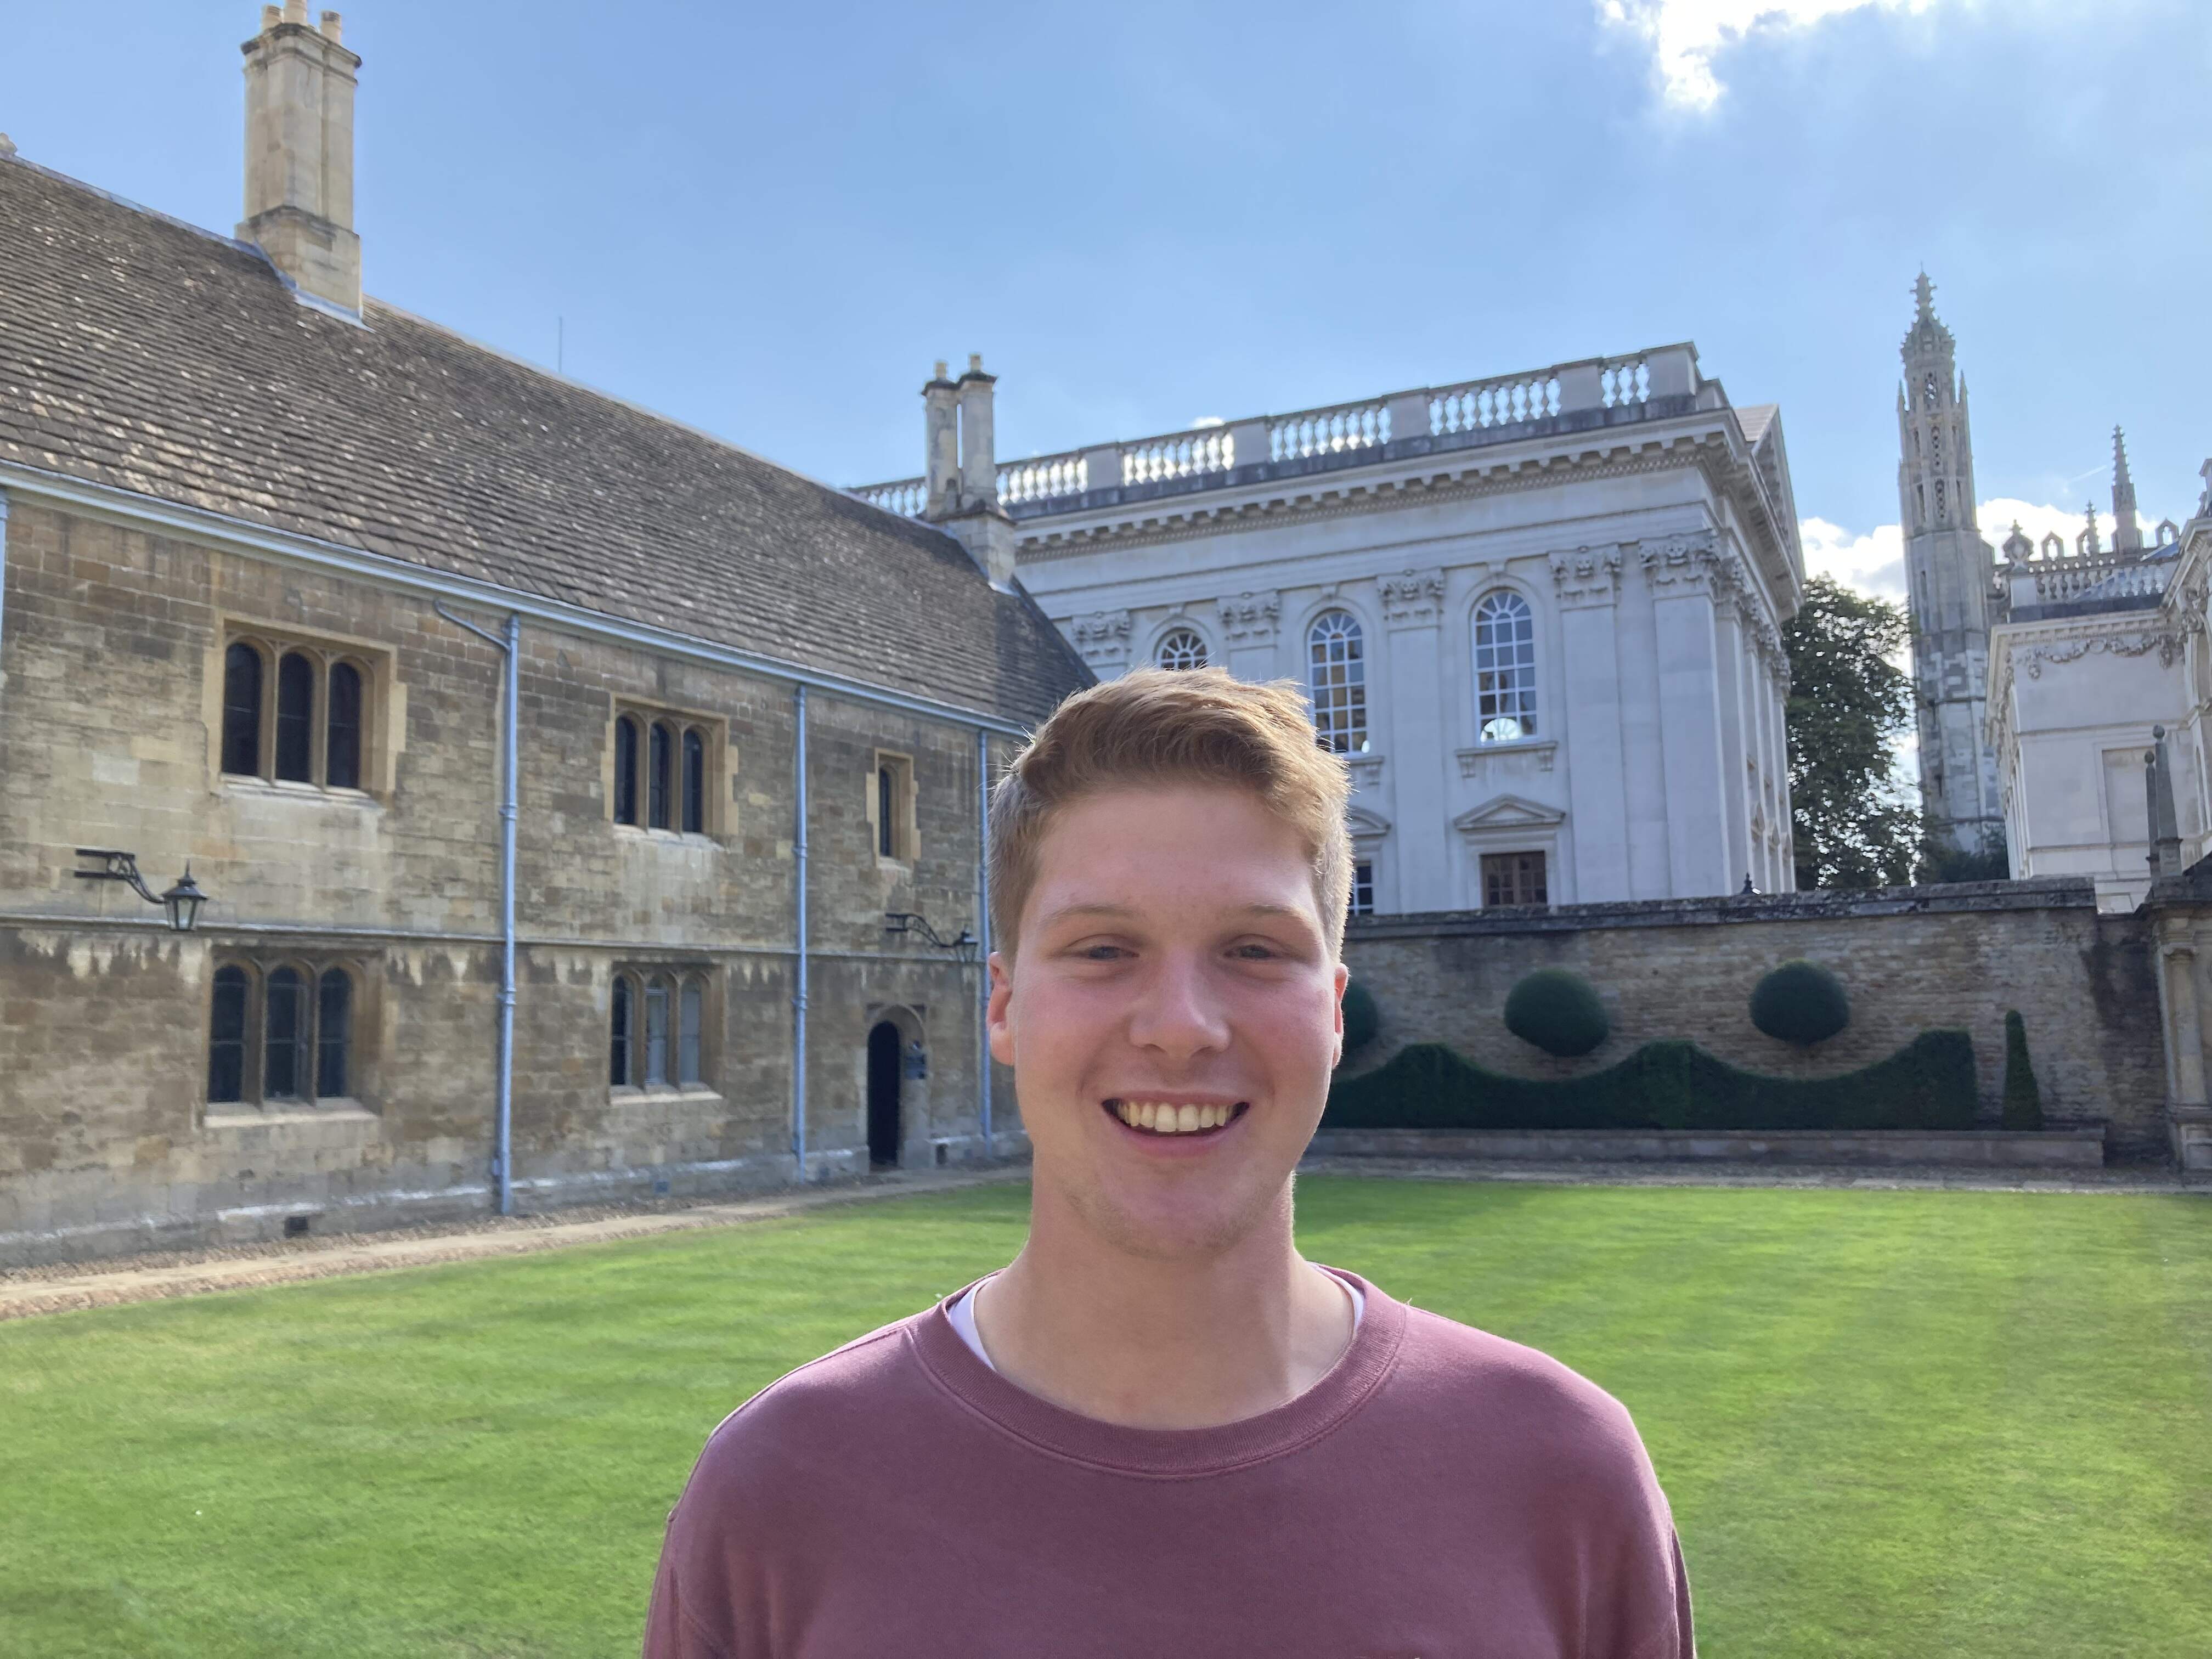 Picture of David smiling in front of Caius Court, wearing a red jumper, with Senate house in the background